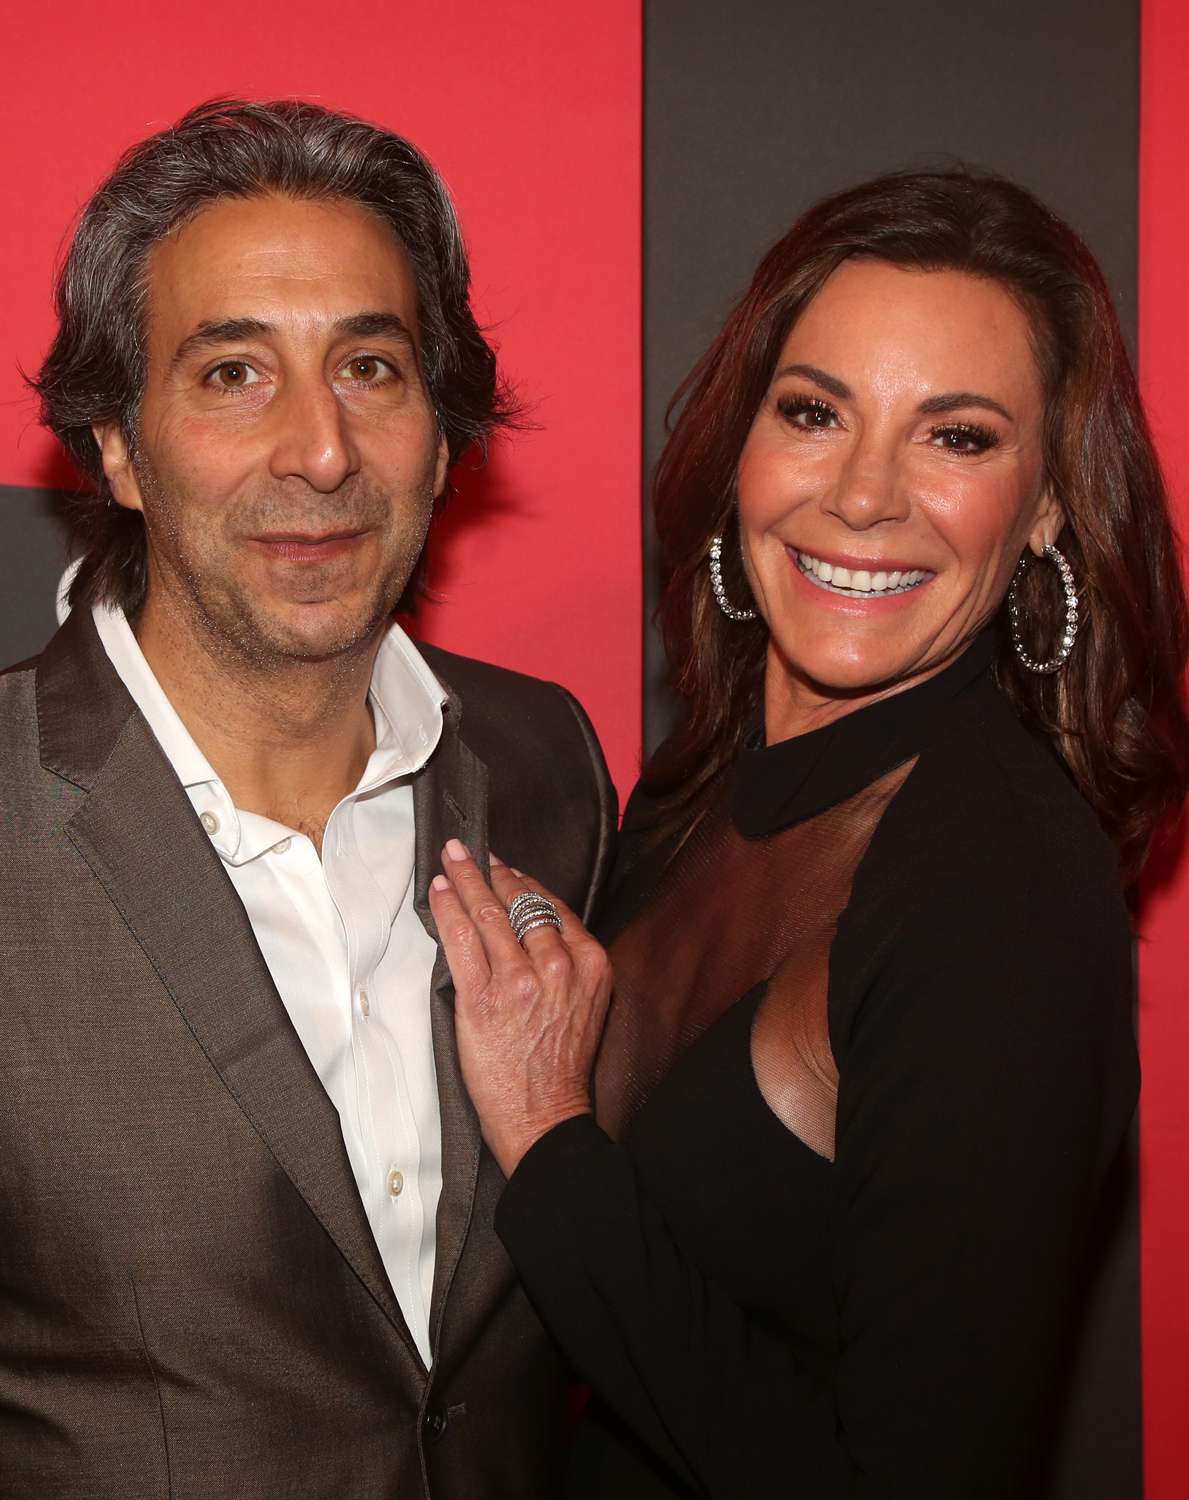 Jacques Azoulay and Luann de Lesseps pose at the opening night of the new Andrew Lloyd Webber Musical "Bad Cinderella" on Broadway at The Imperial Theatre on March 23, 2023 in New York City.